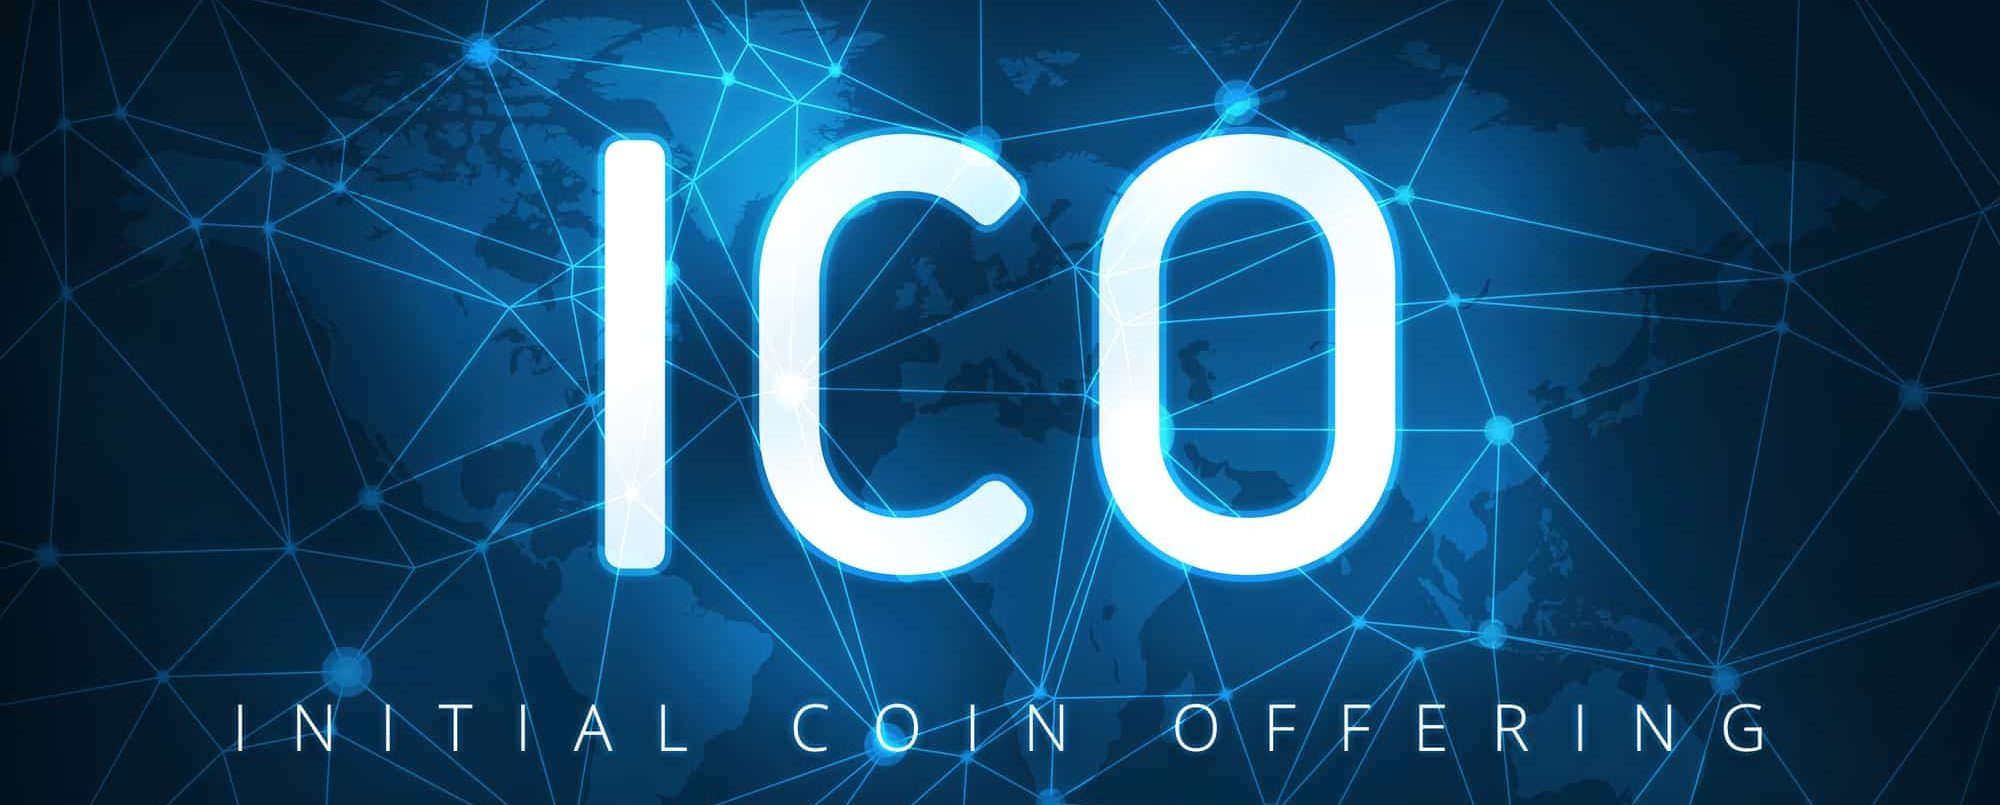 ICO initial coin offering PR marketing